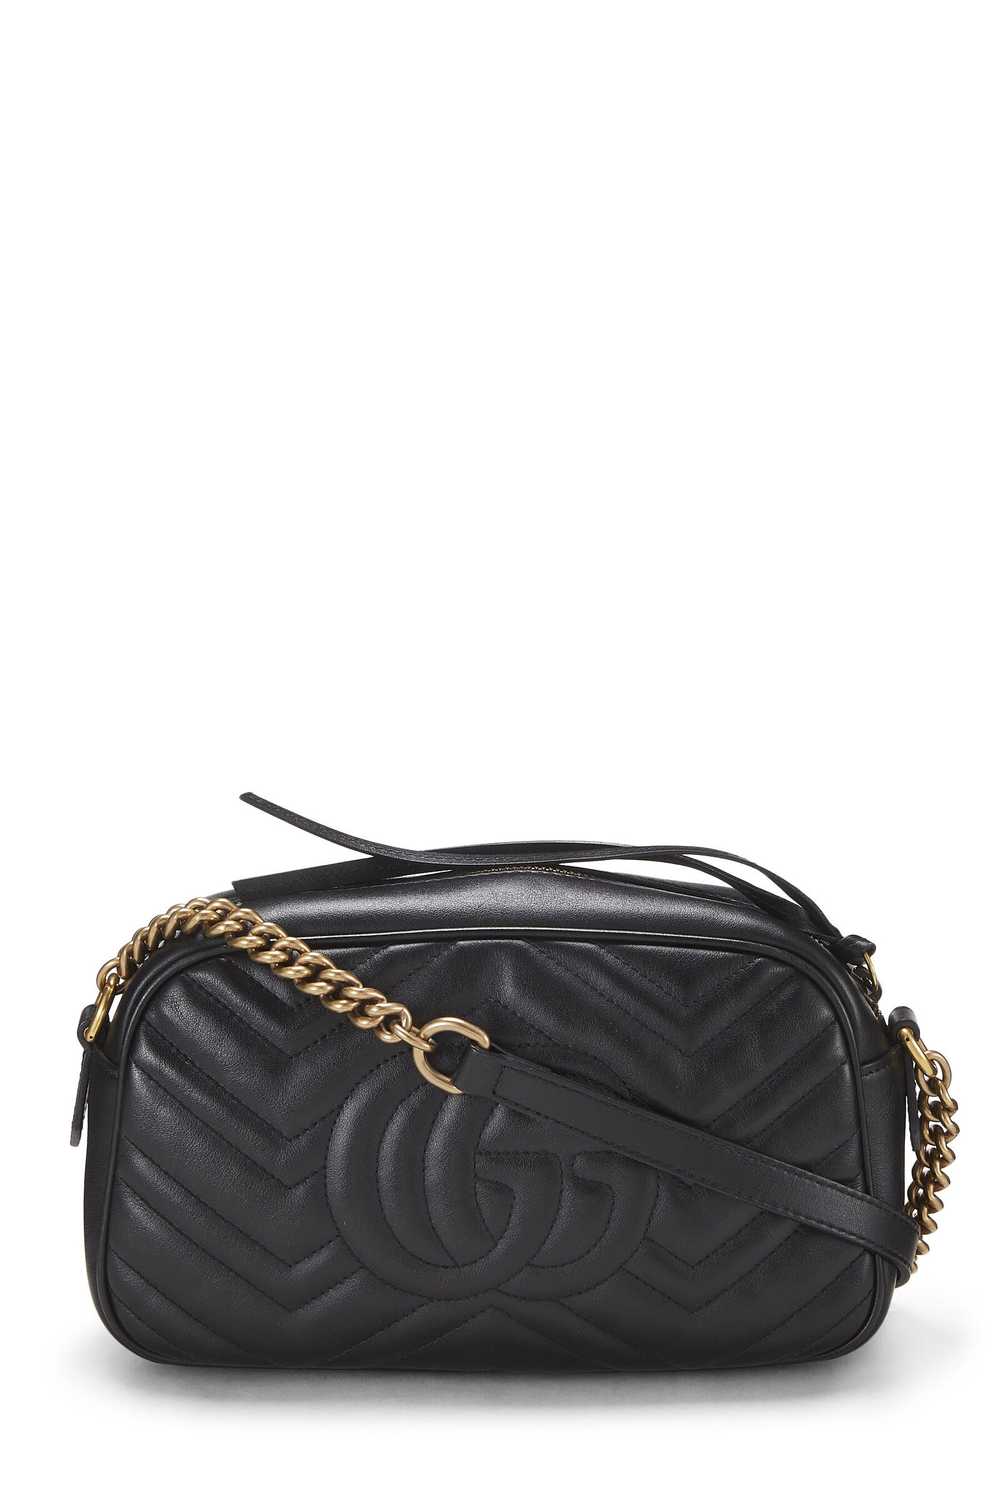 Black Leather GG Marmont Crossbody Small - image 4